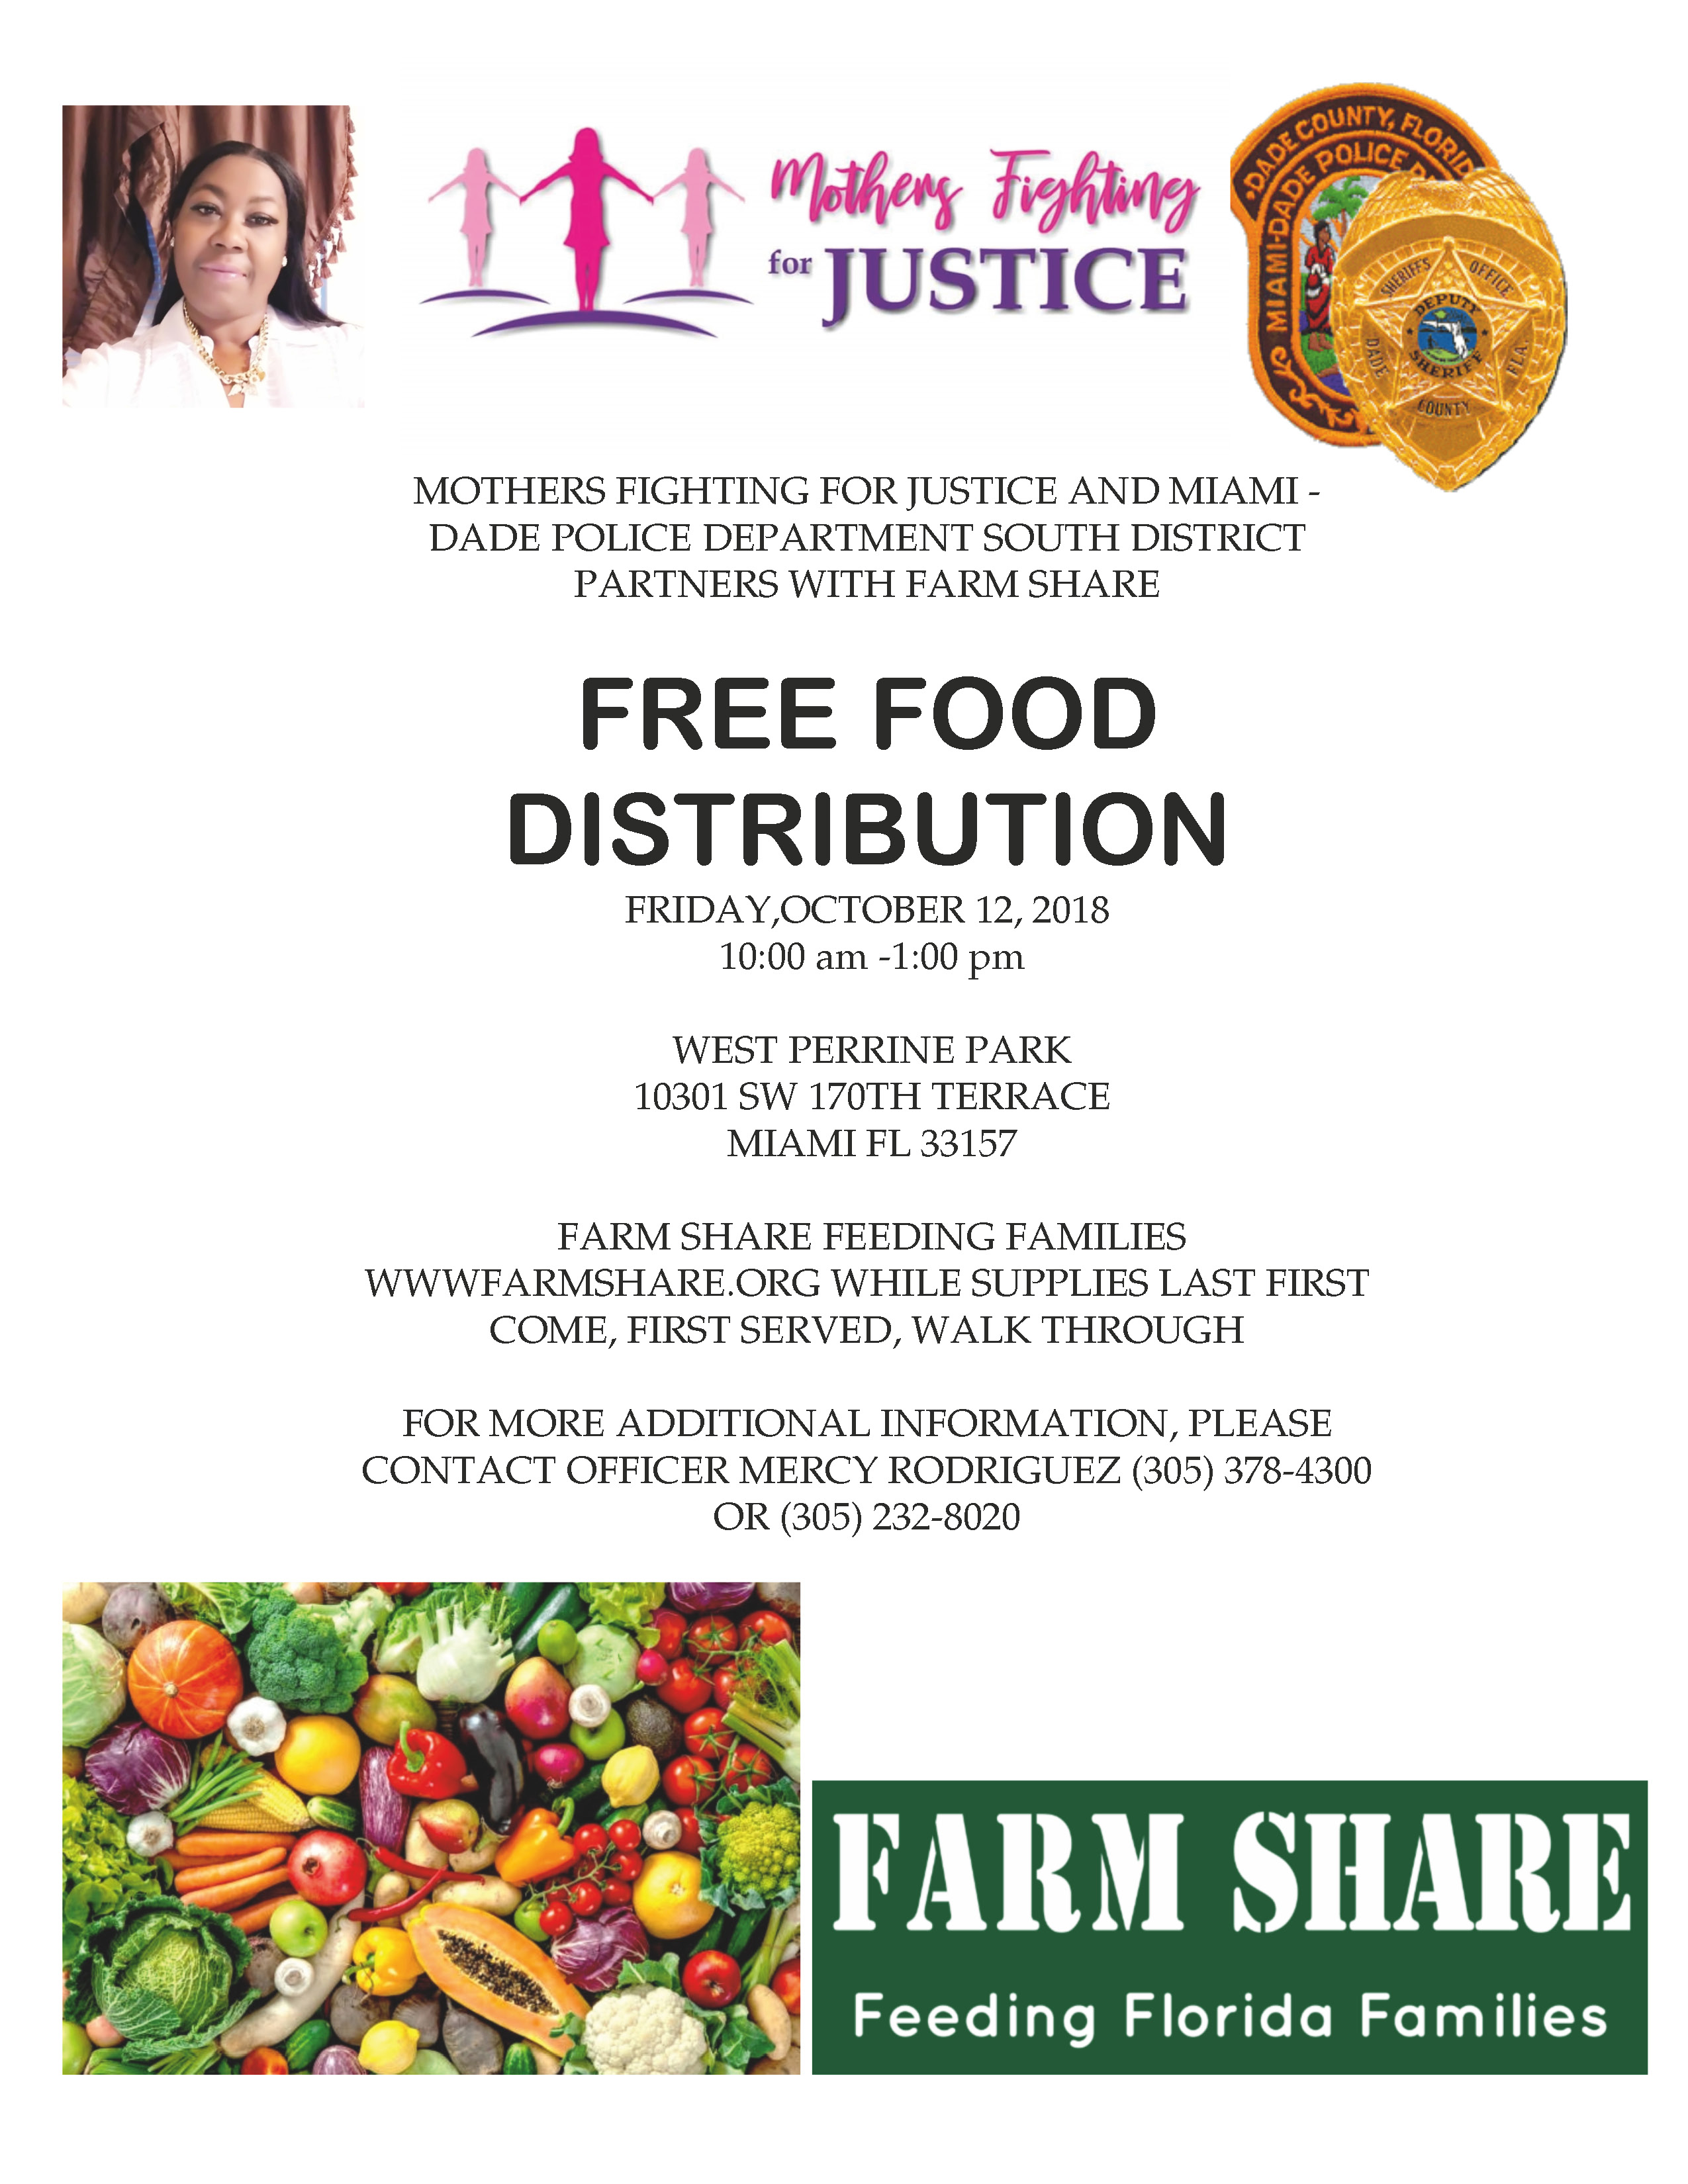 Event Flyer - Farm Share Feeding Families www.farmshare.org while supplies last. First come, first served. Walk through.